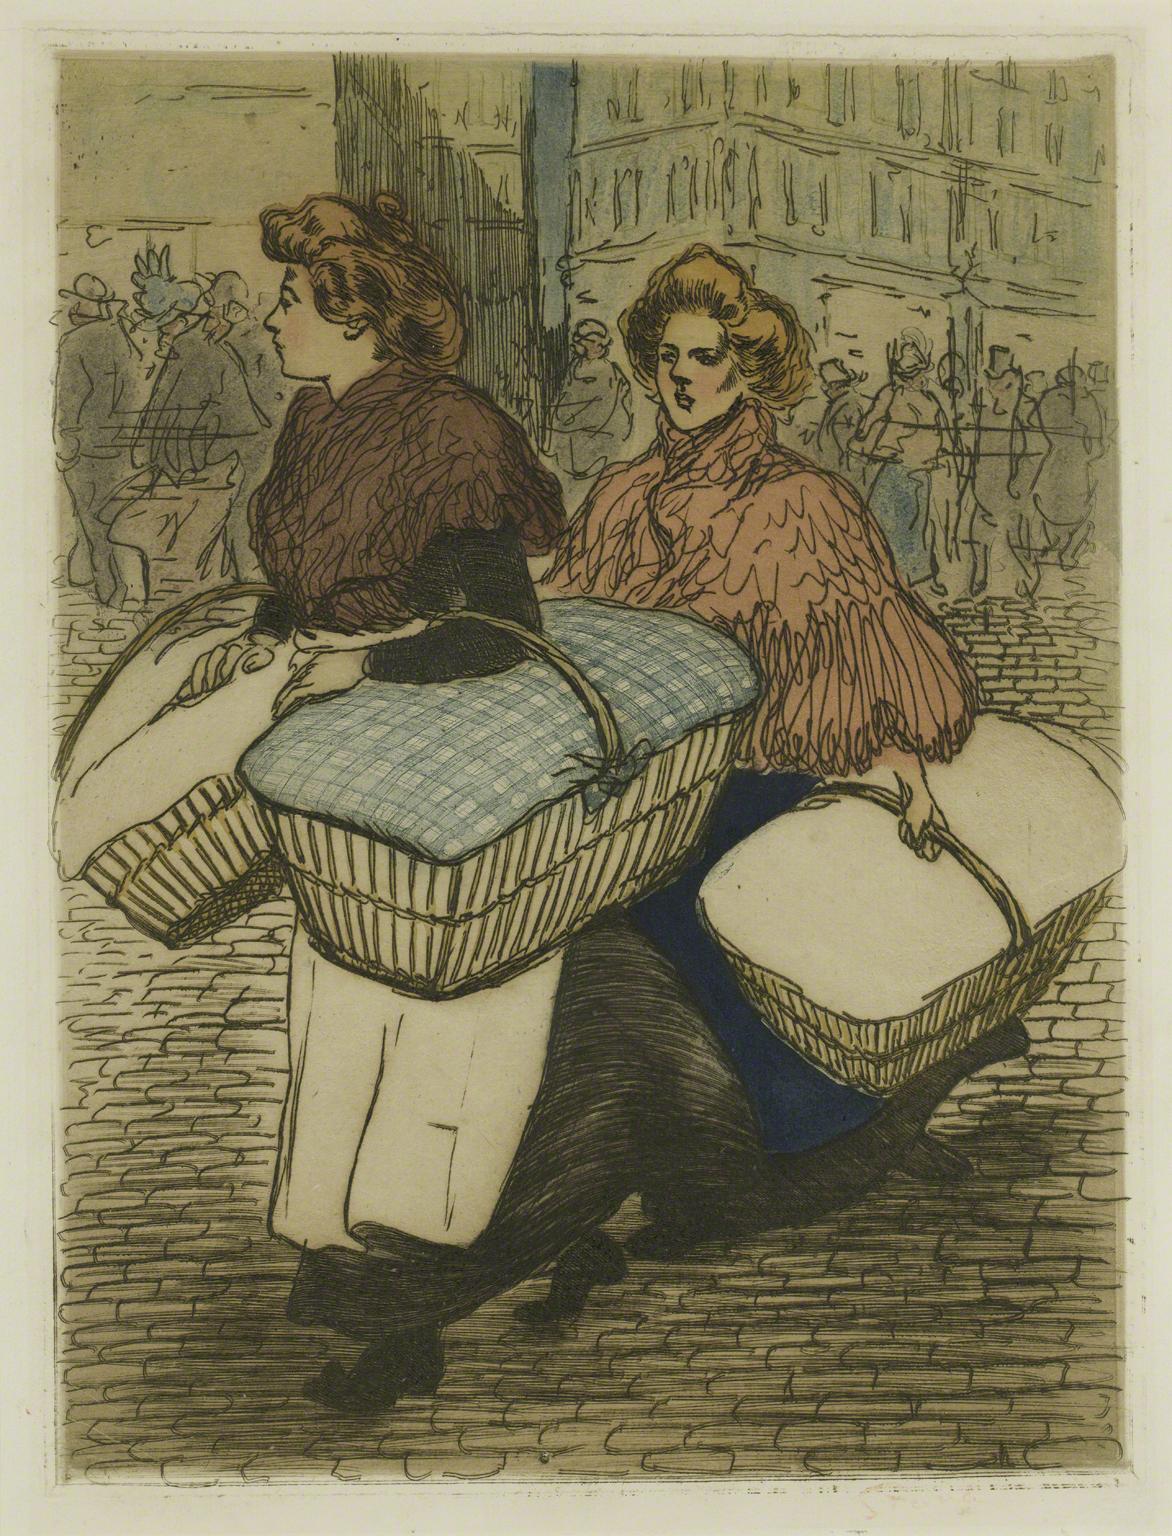 Street scene with two women in late 19th century attire carrying baskets